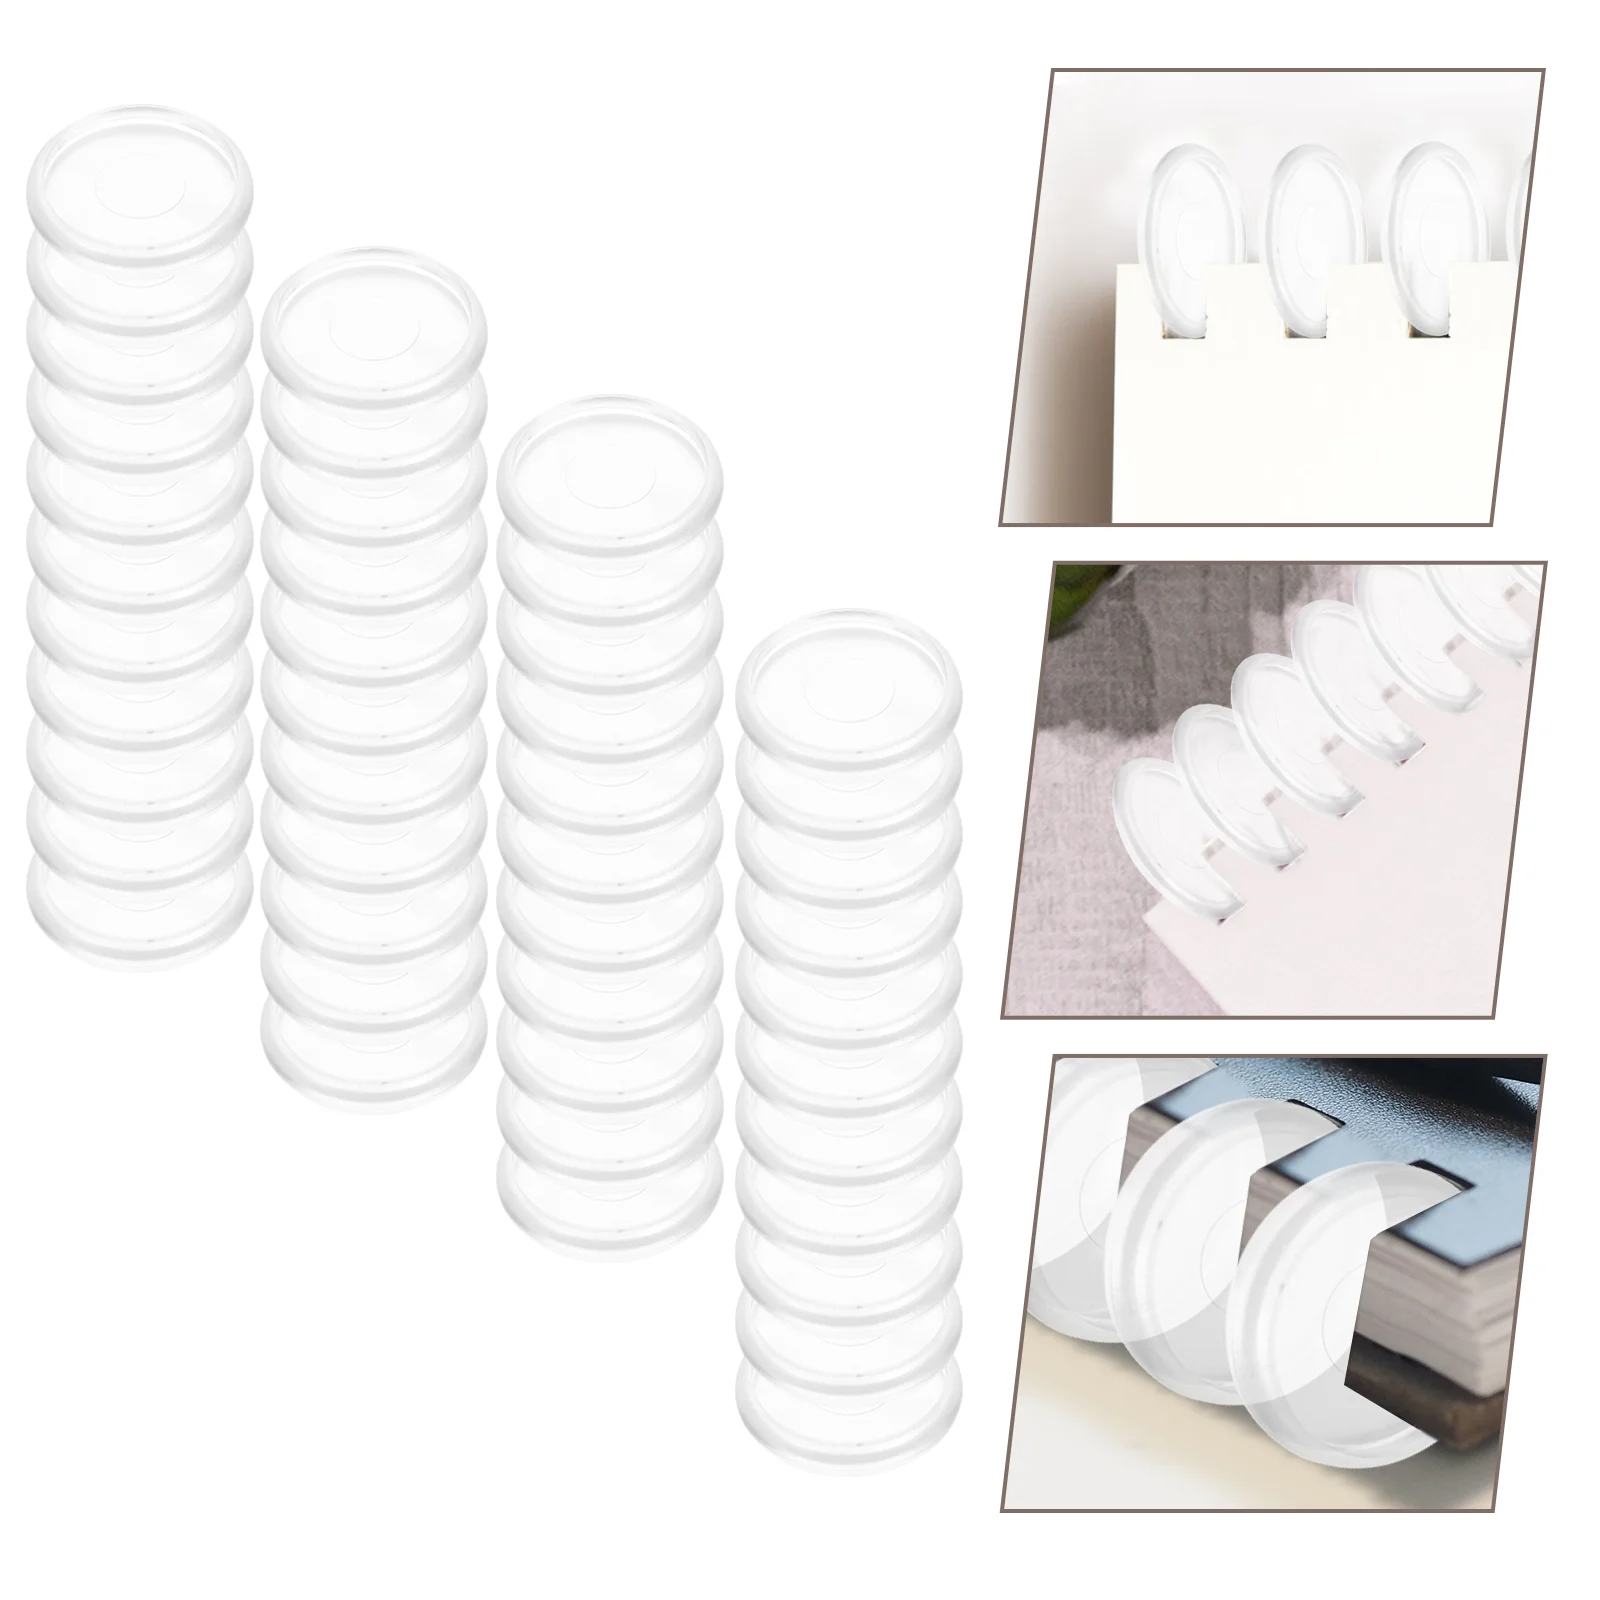 

44 Pcs Binder Buckle Books Plastic Ring Loose Leaf Binding Snap Whiteboard Round Rings Buckles Abs Discbound Expansion Discs